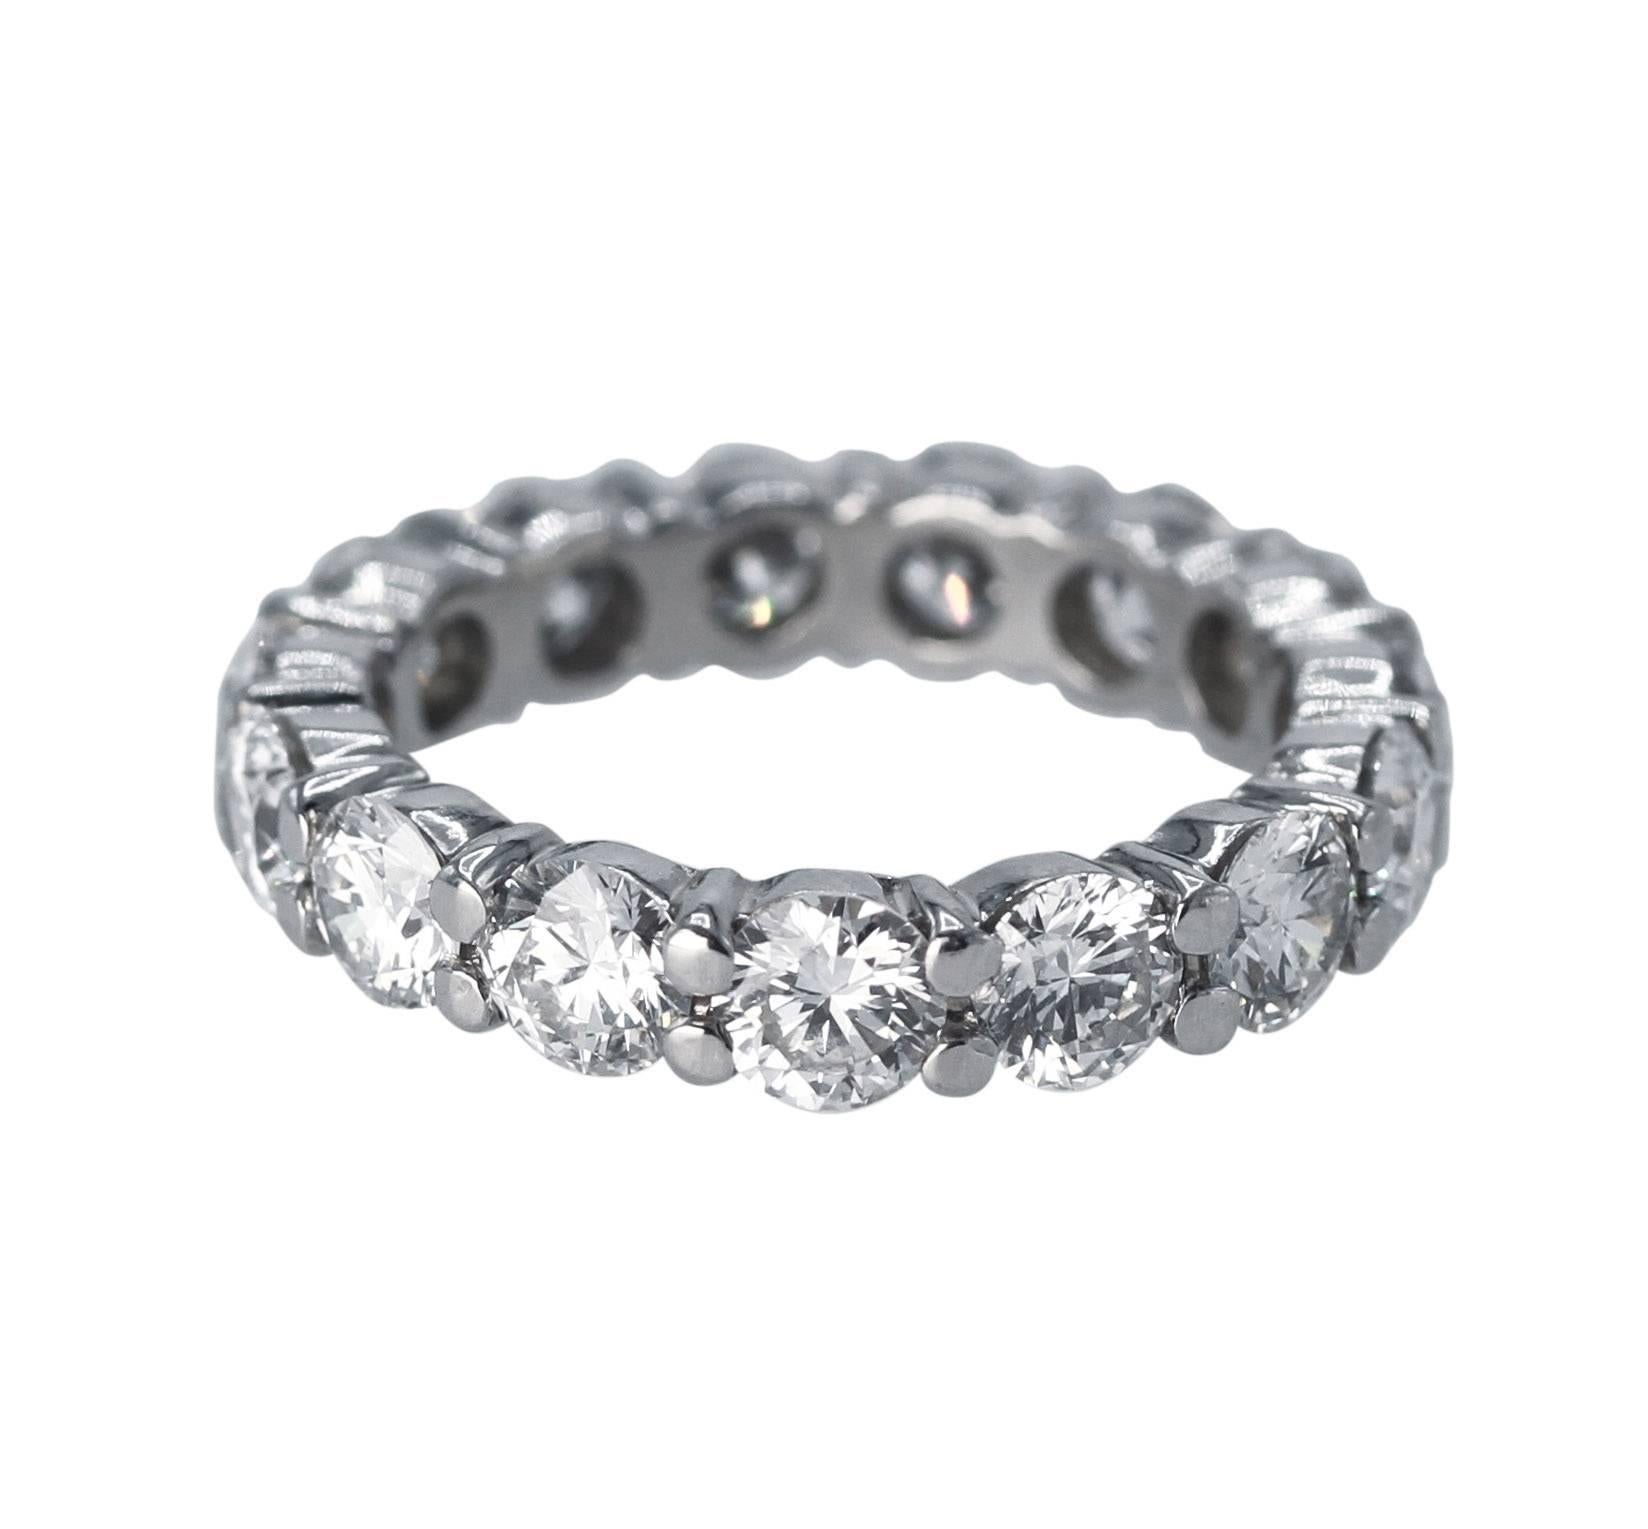 Platinum and Diamond Eternity Ring
• 15 round diamonds weighing approximately 4.00 carats, G-H color, VS1-VS2 clarity
• Size 6 1/4, shared prongs, gross weight 6.4 grams